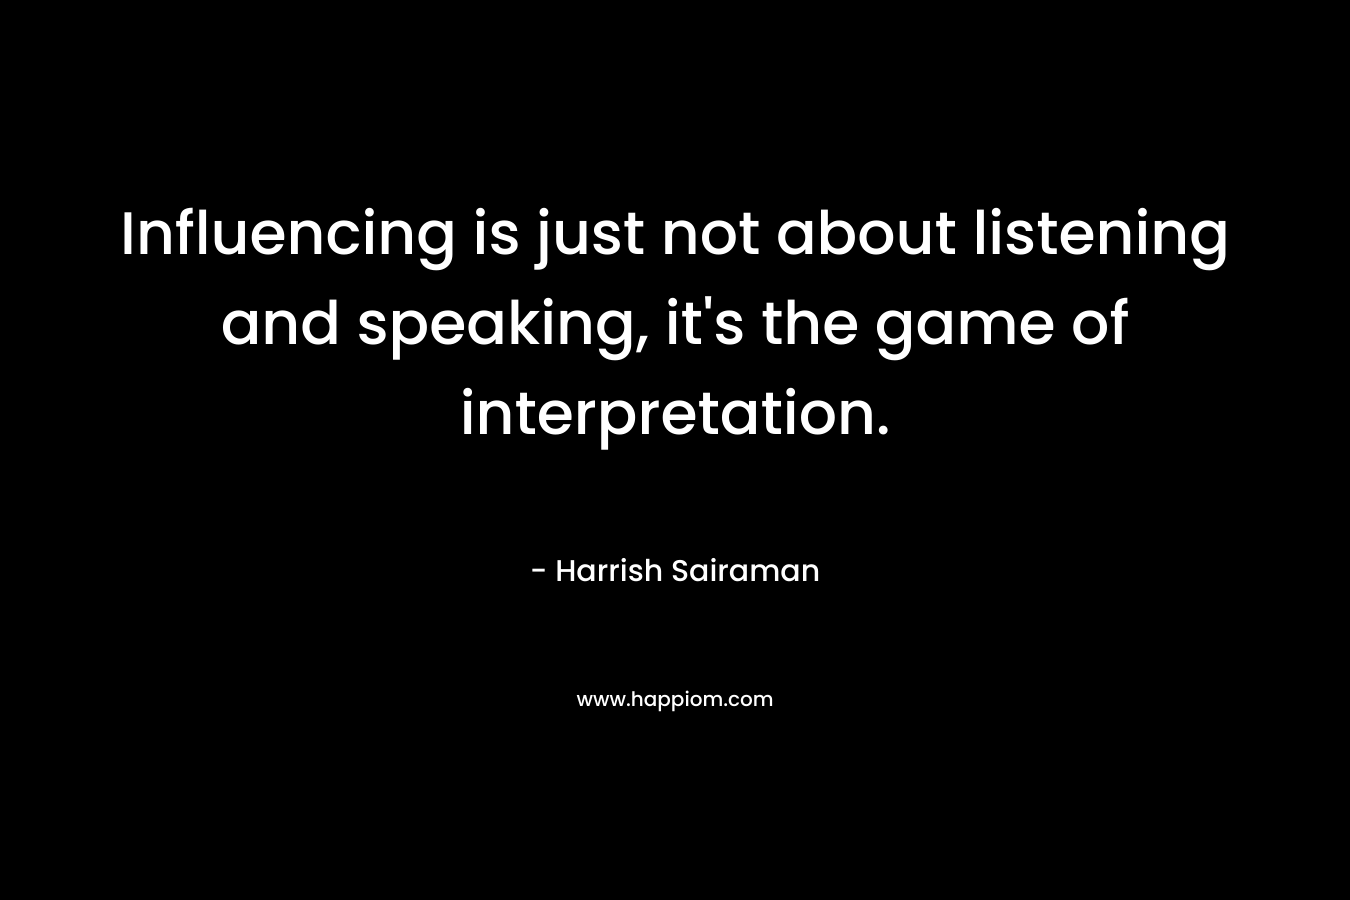 Influencing is just not about listening and speaking, it’s the game of interpretation. – Harrish Sairaman